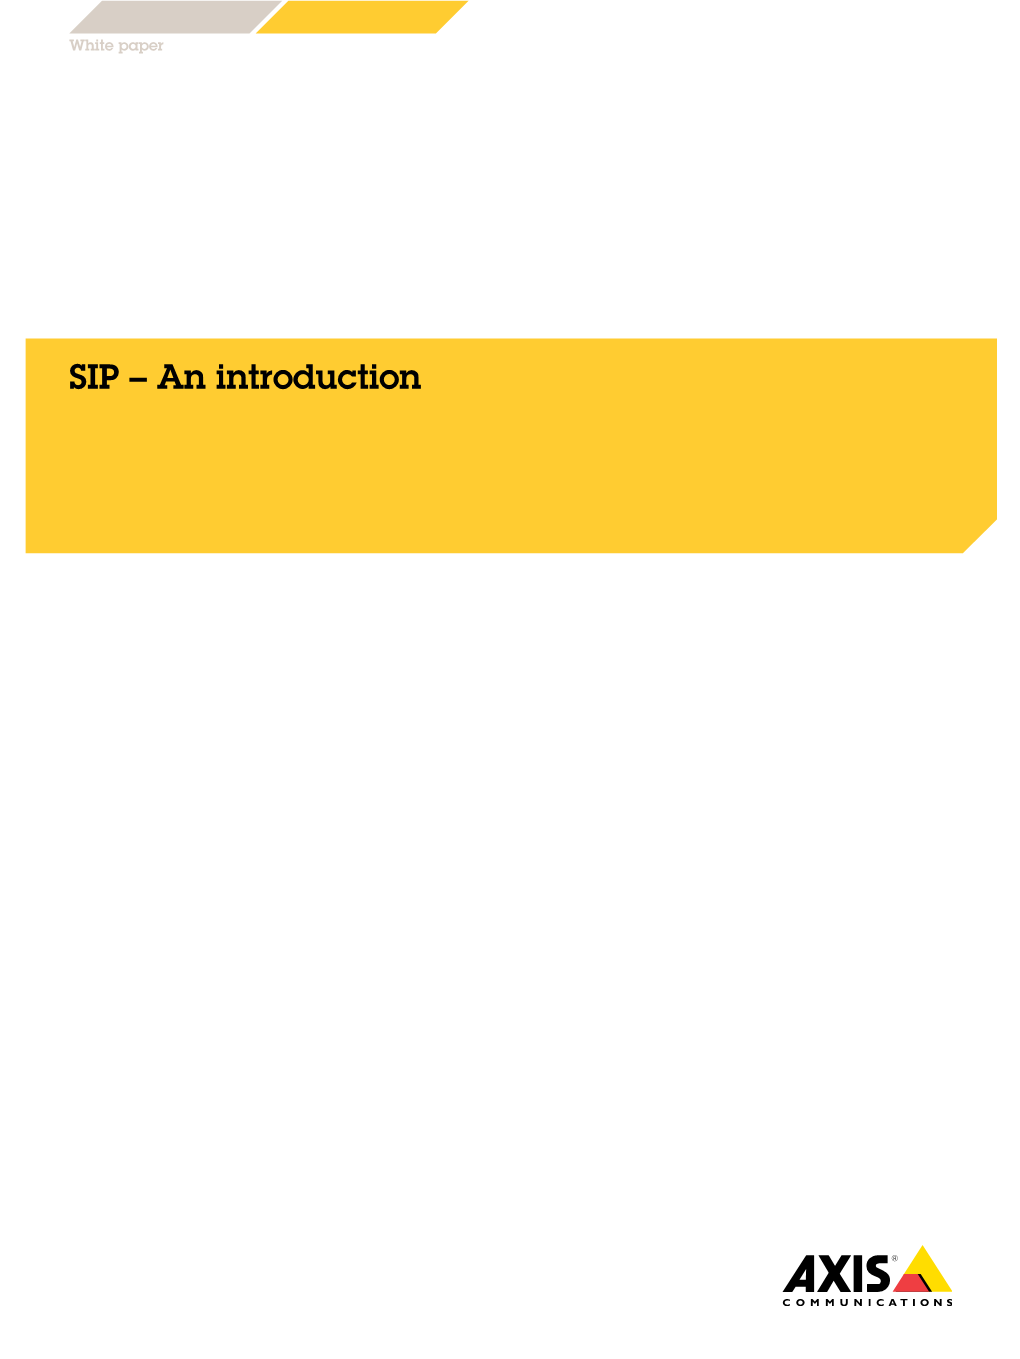 White Paper. SIP an Introduction